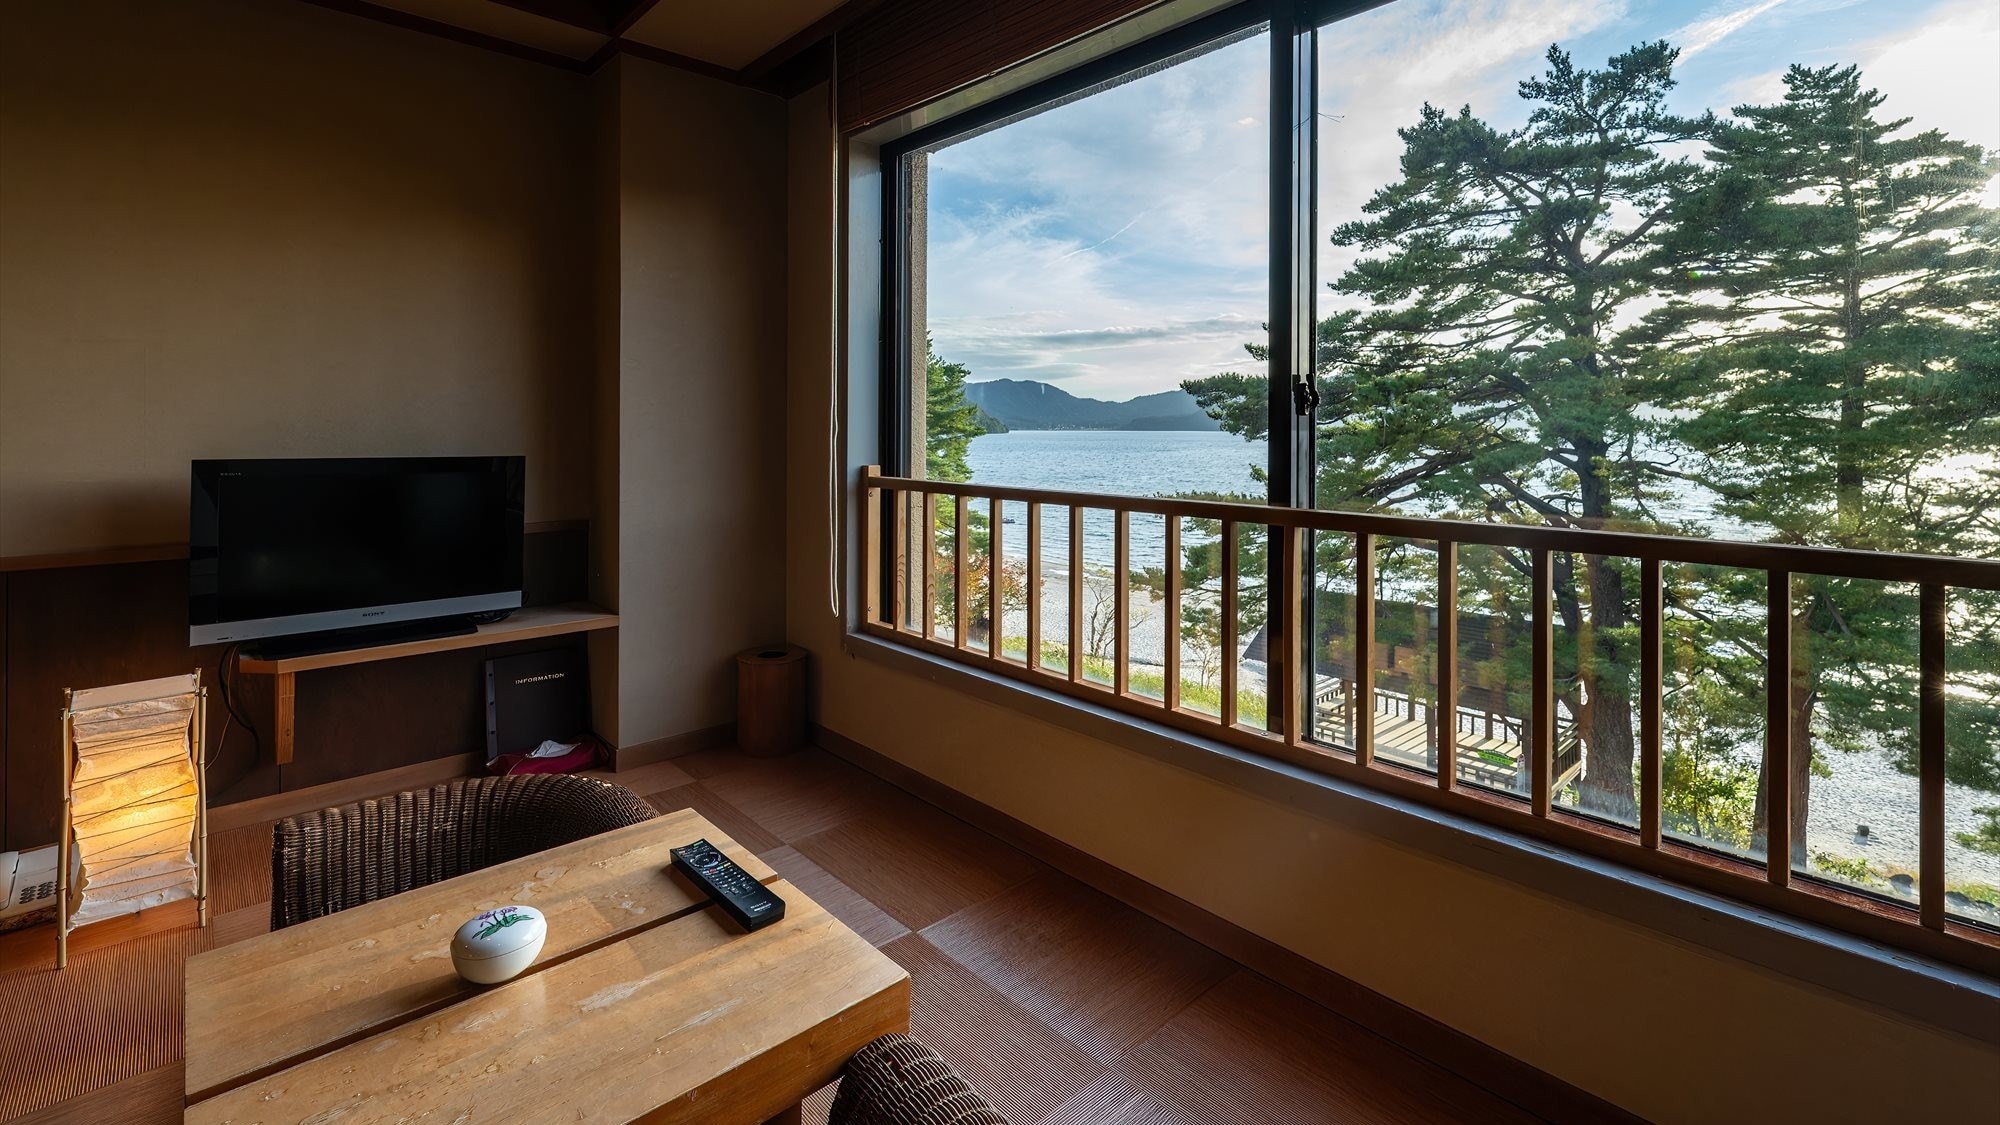 ■Please stretch your legs and relax on the raised tatami floor while looking out at Lake Tazawa.